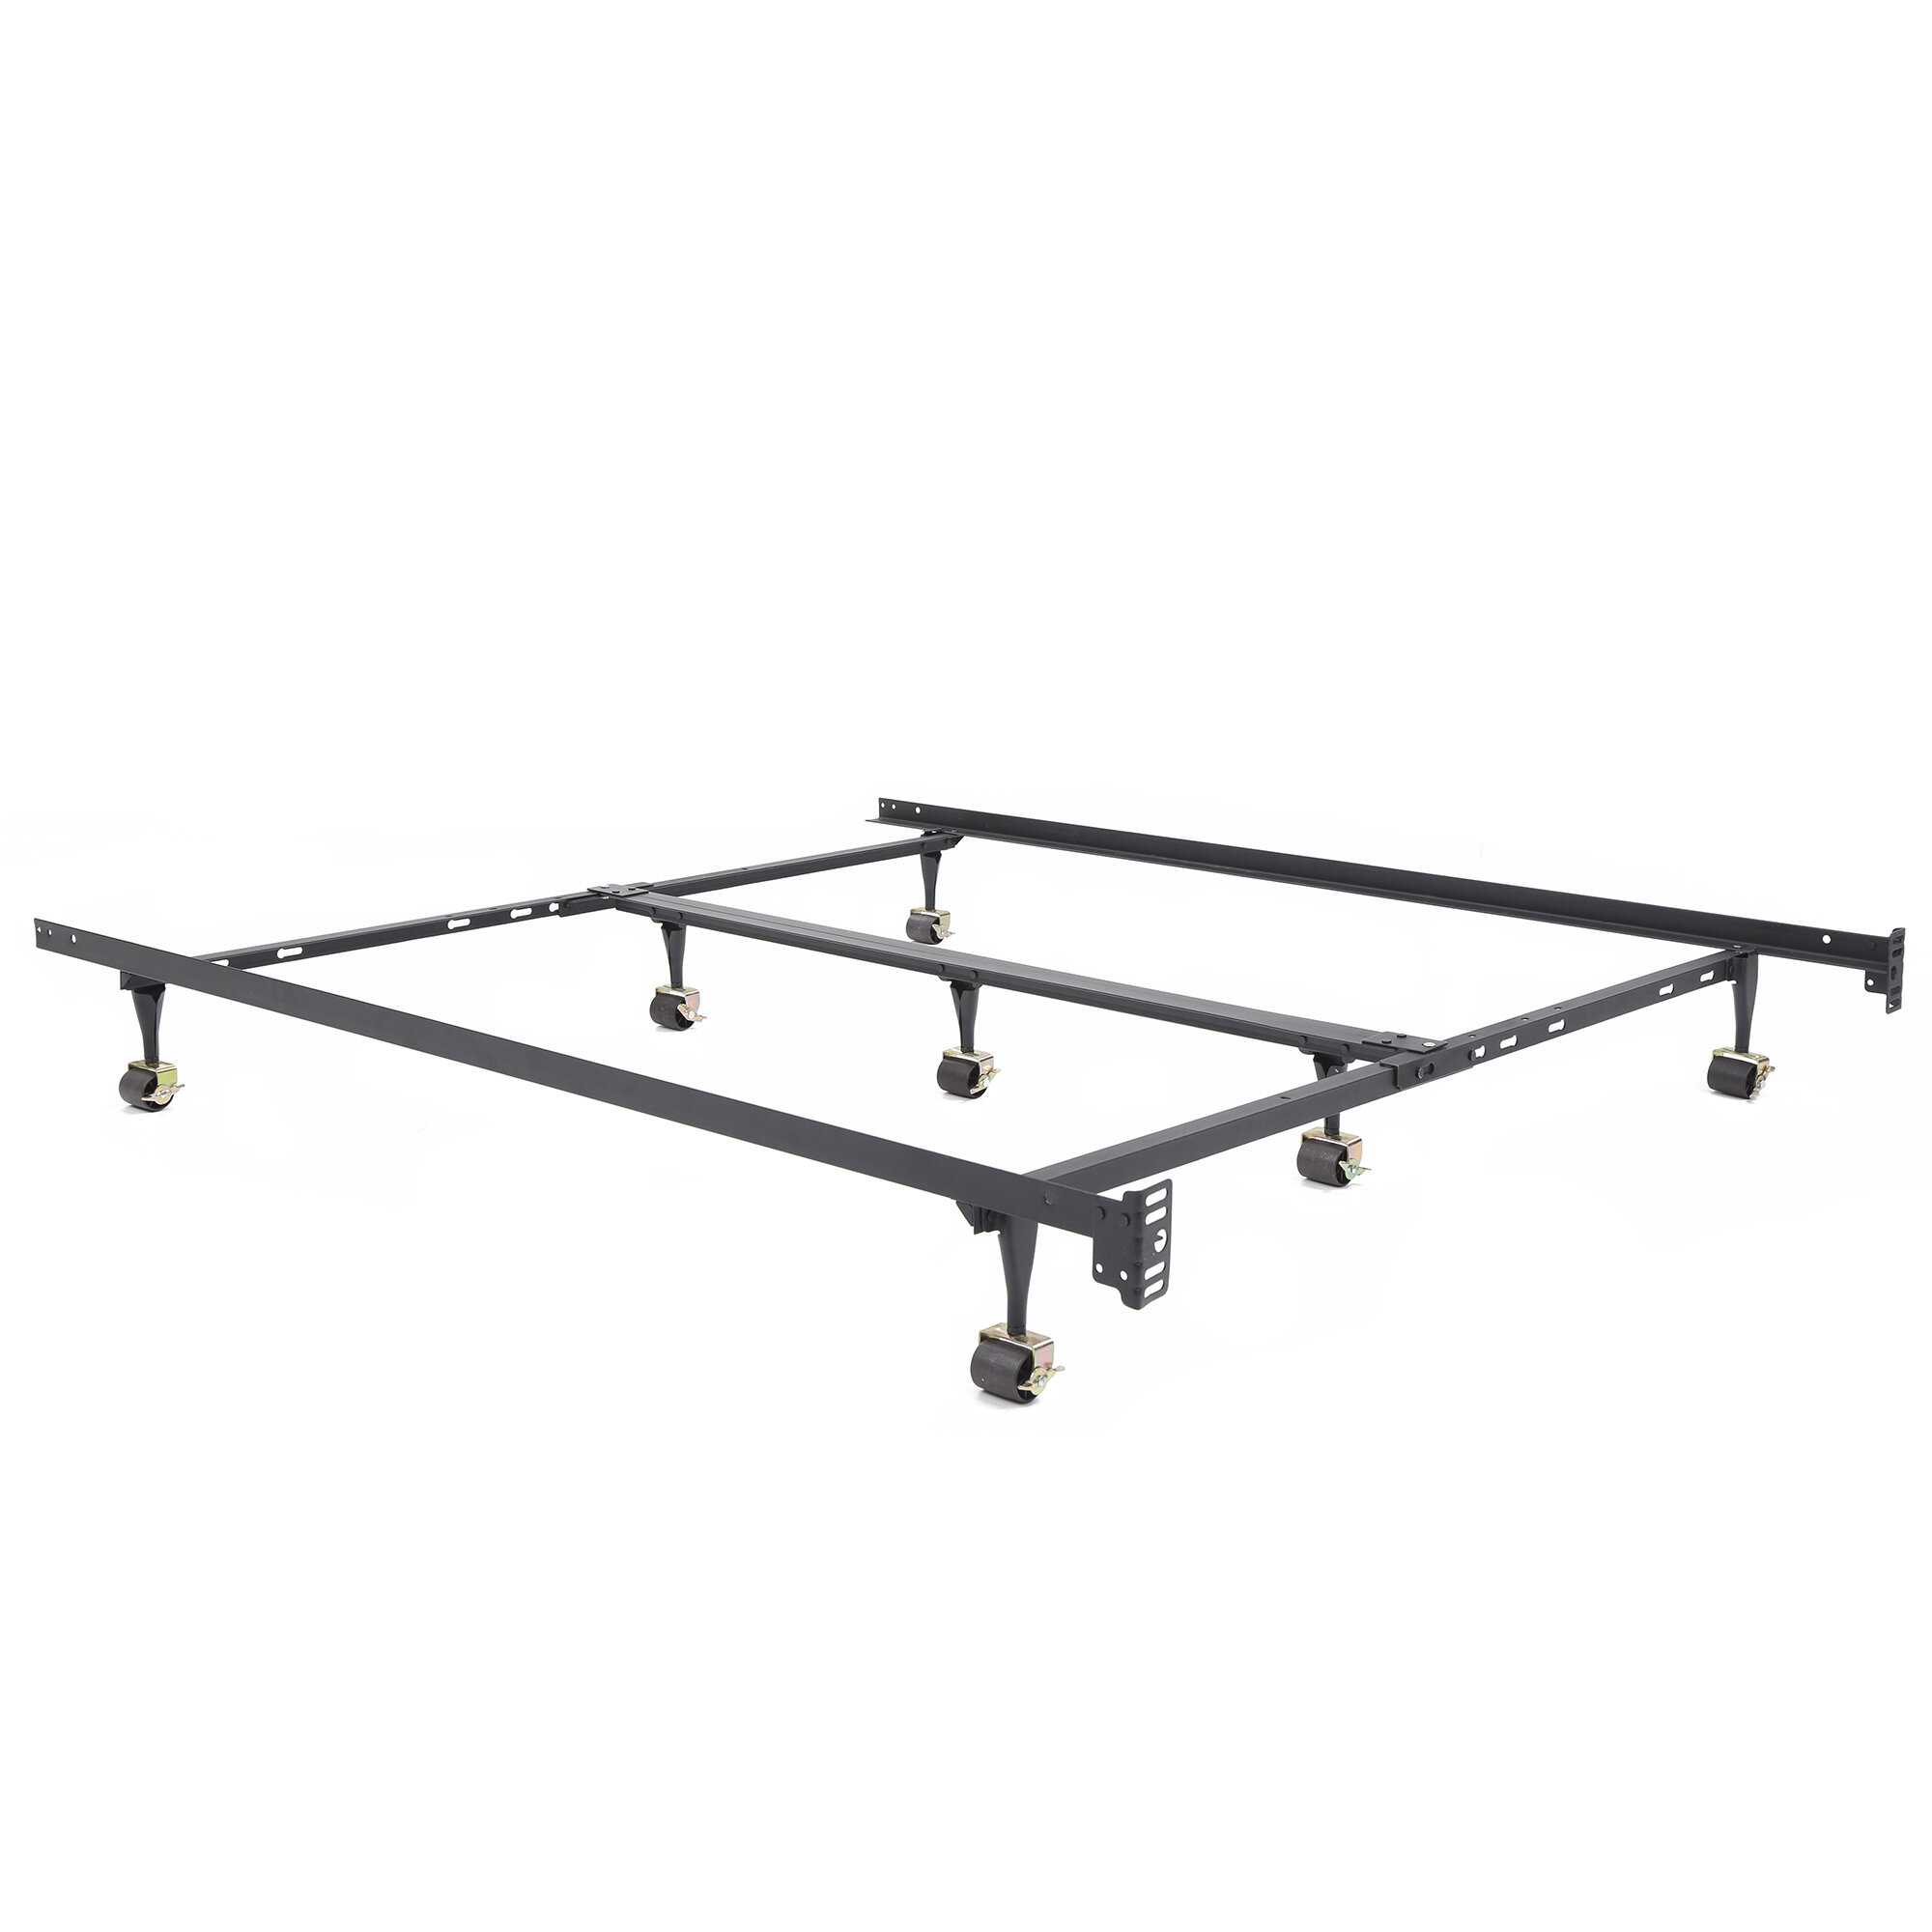 Caulkins Heavy Duty Adjustable Metal Bed Frame With Double Rail Center Bar And 7 Locking Rug Rollers